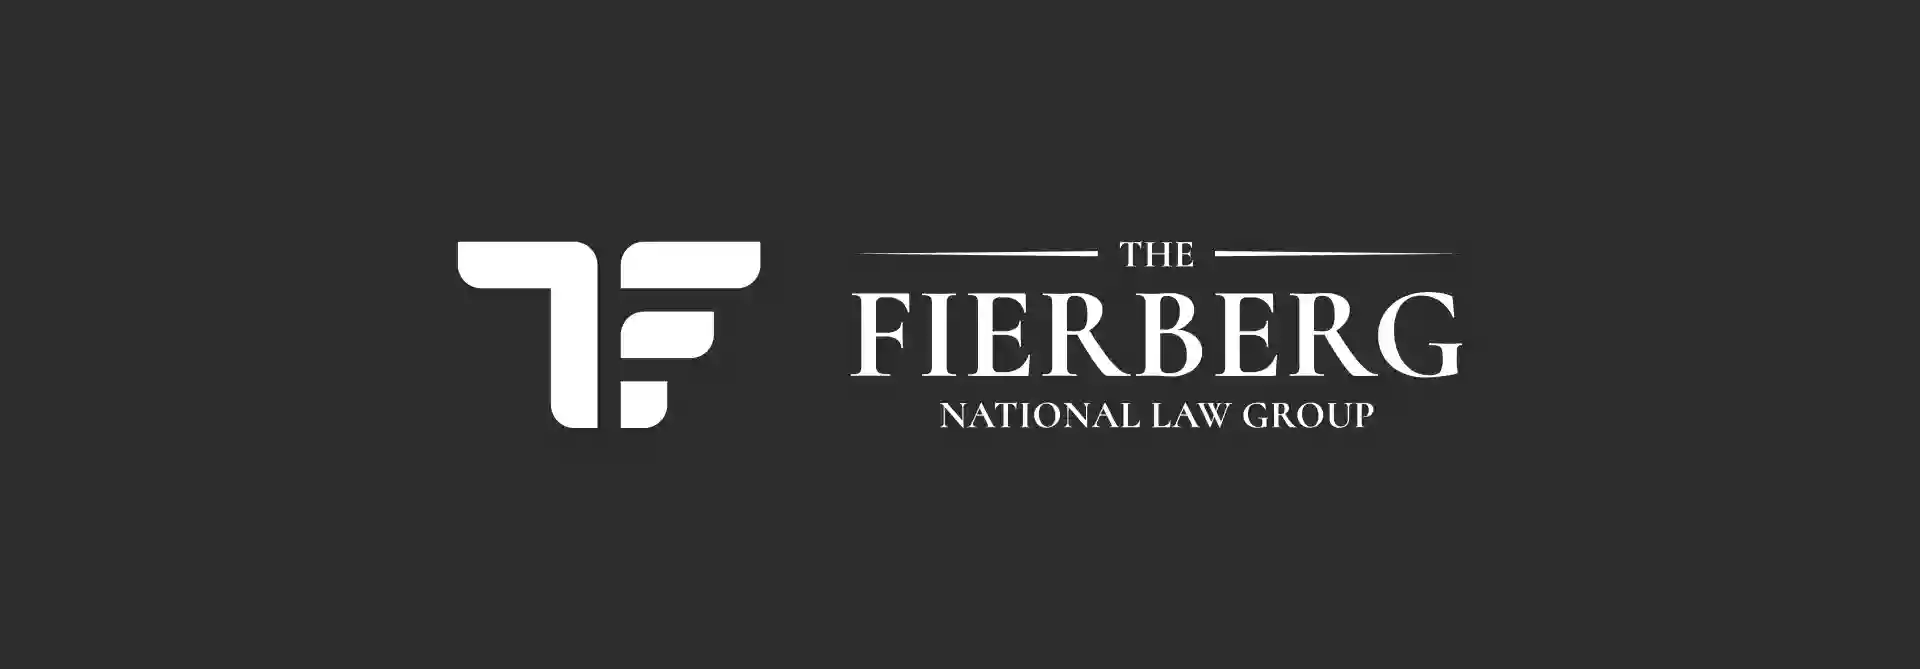 The Fierberg National Law Group, PLLC